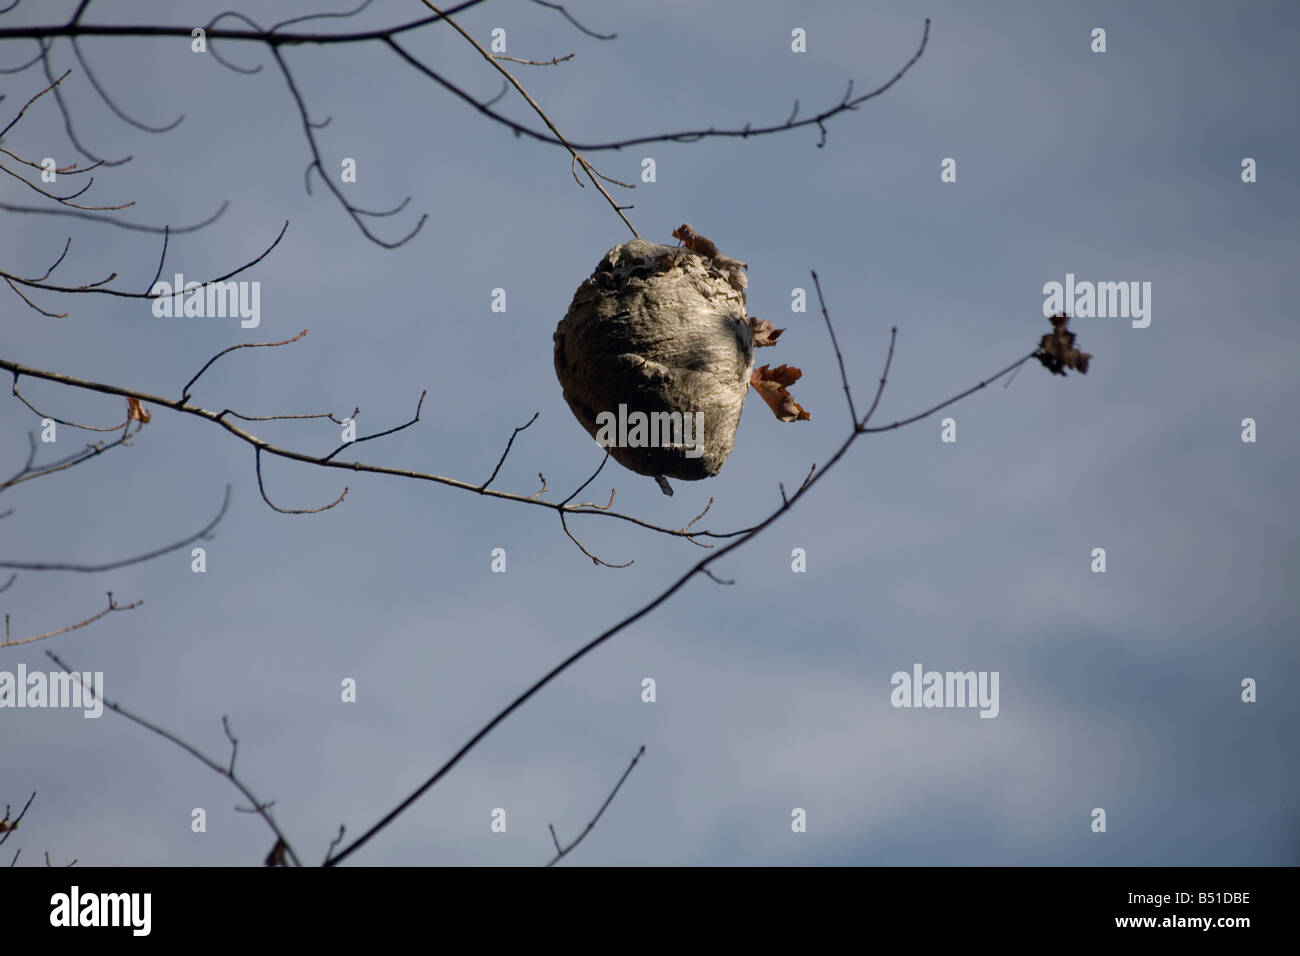 Photograph of a hornet's nest hanging in a tree. Stock Photo